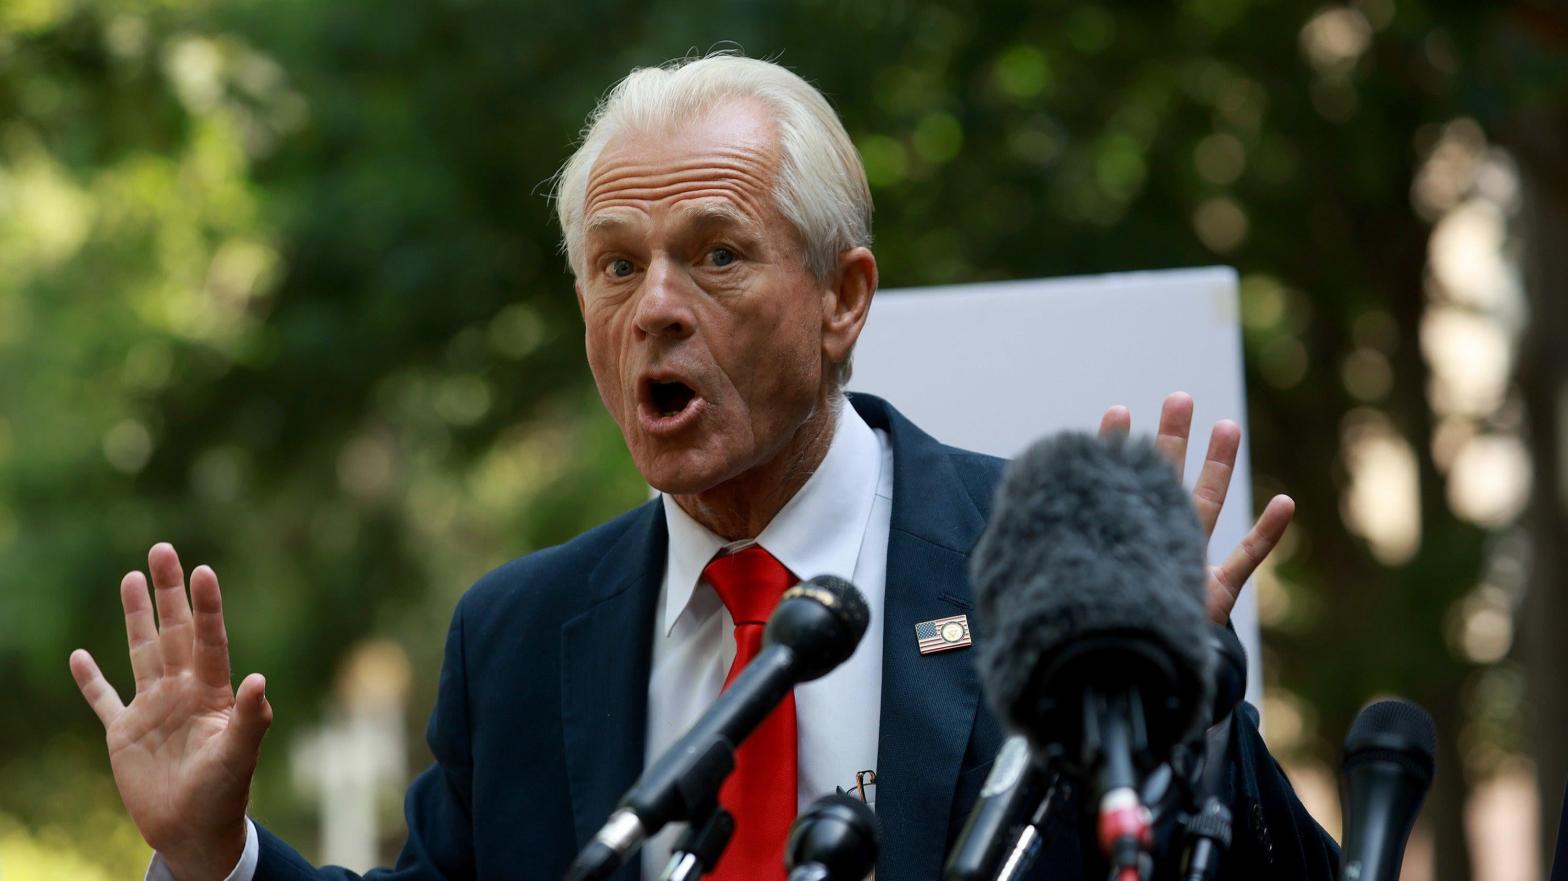 Neo-fascist apologist Peter Navarro speaks with the media as he leaves the Prettyman U.S. Courthouse on June 17, 2022 in Washington, DC. (Photo: Joe Raedle, Getty Images)